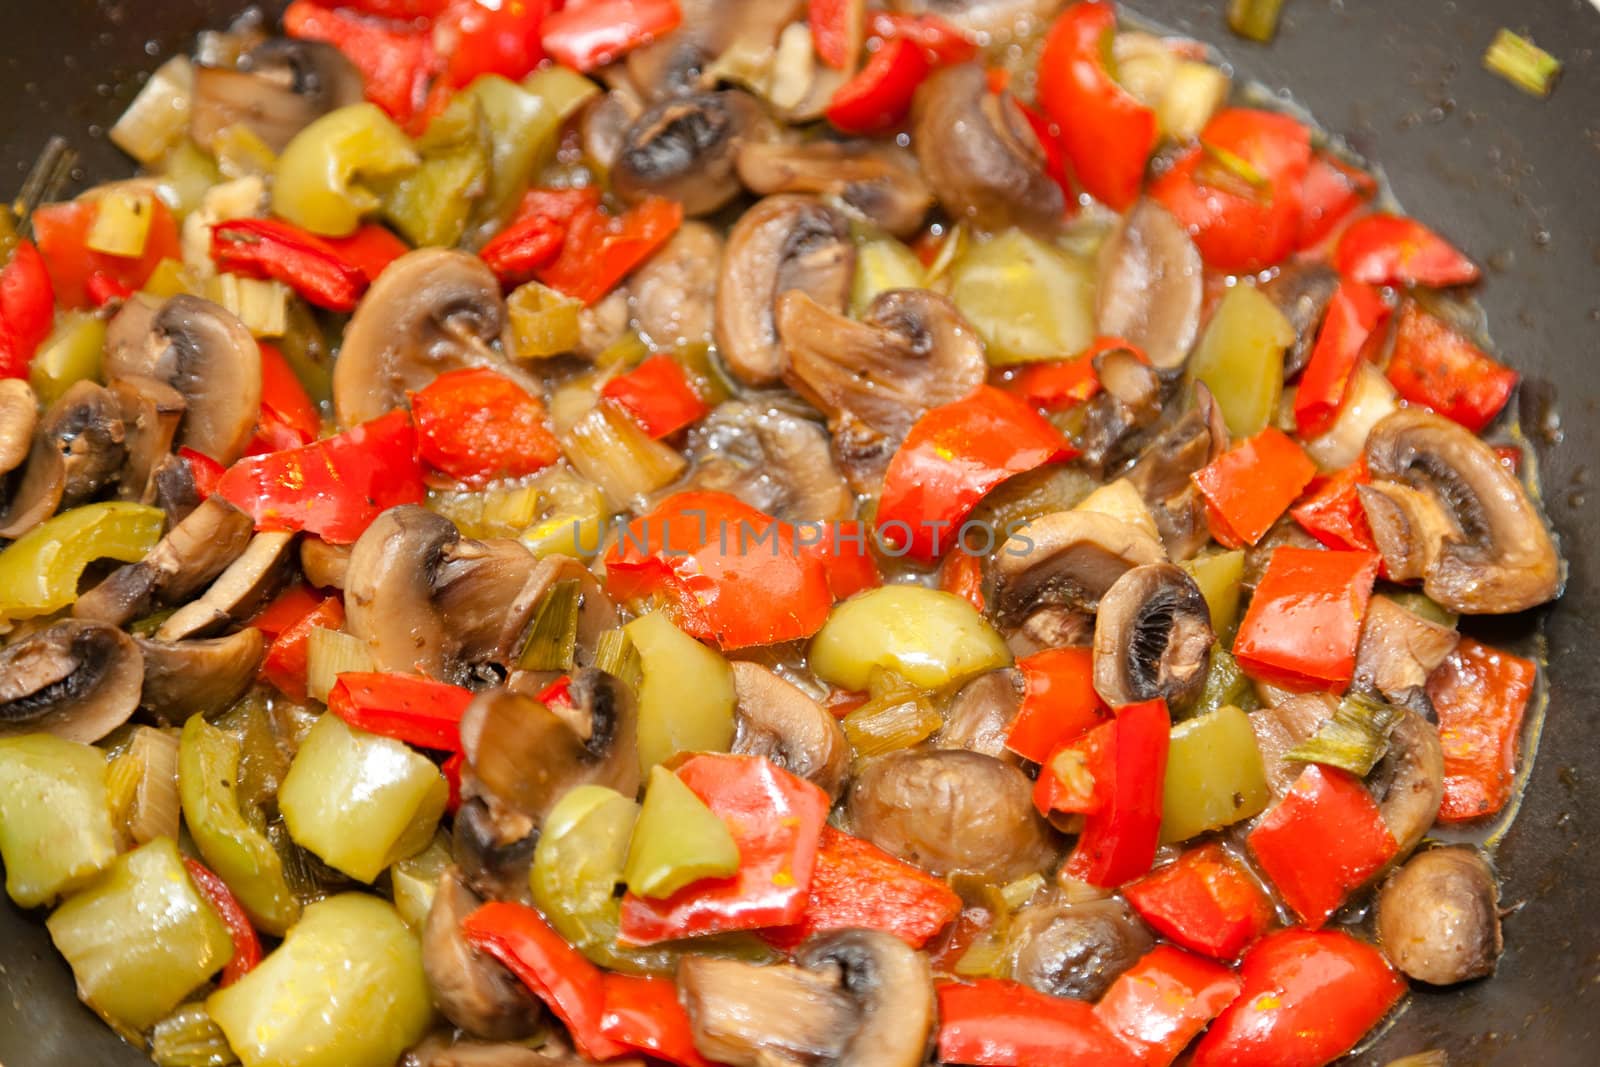 Marinated Mushrooms with Red Bell Peppers in a frying pan.